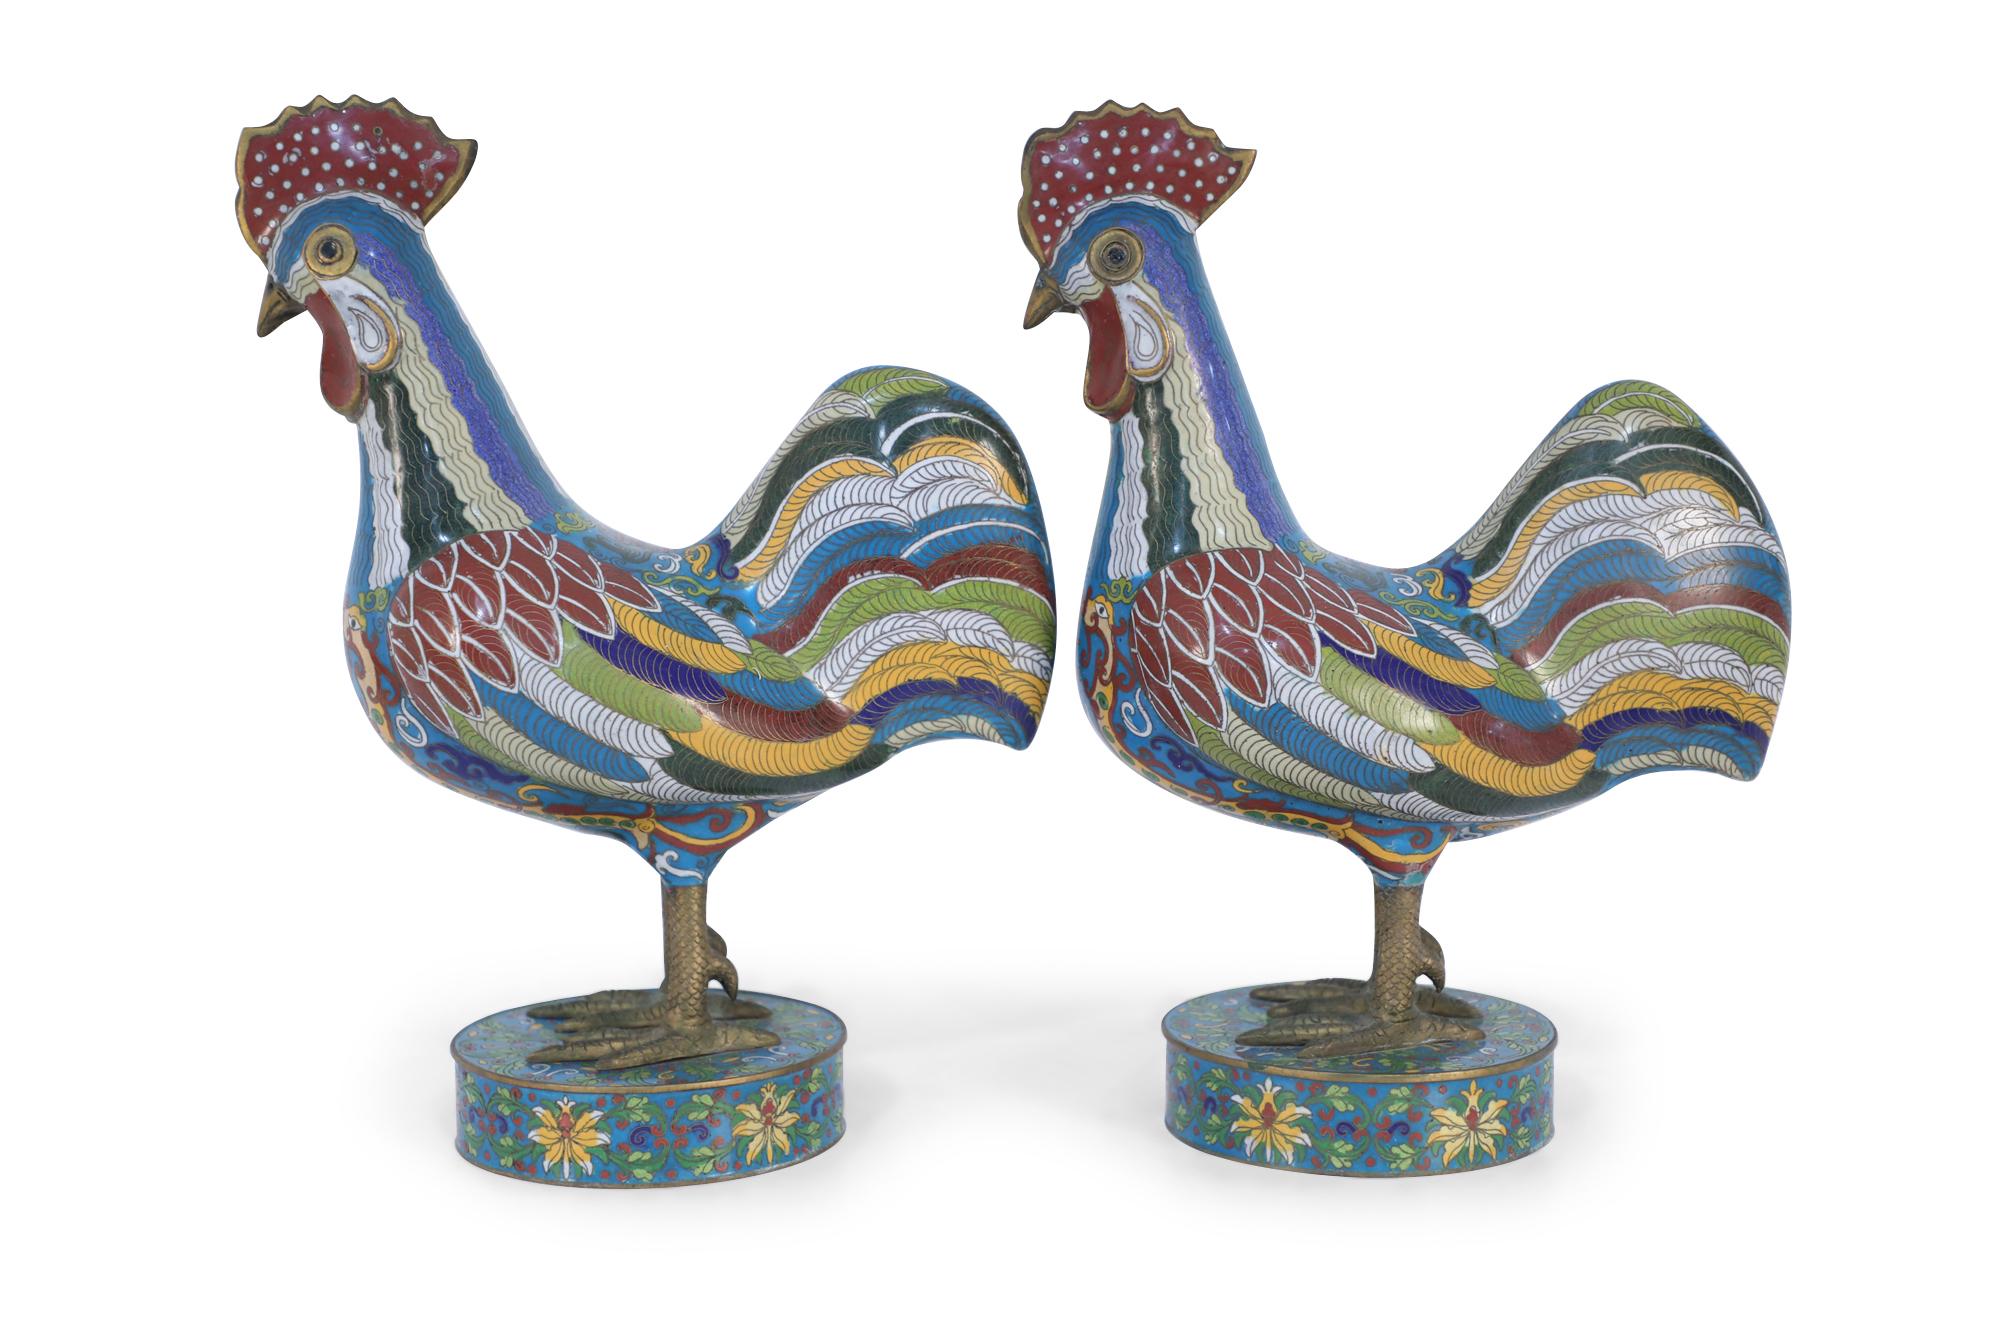 Pair of Early 20th Century Chinese Multi-Colored Cloisonne Rooster Sculptures In Good Condition For Sale In New York, NY